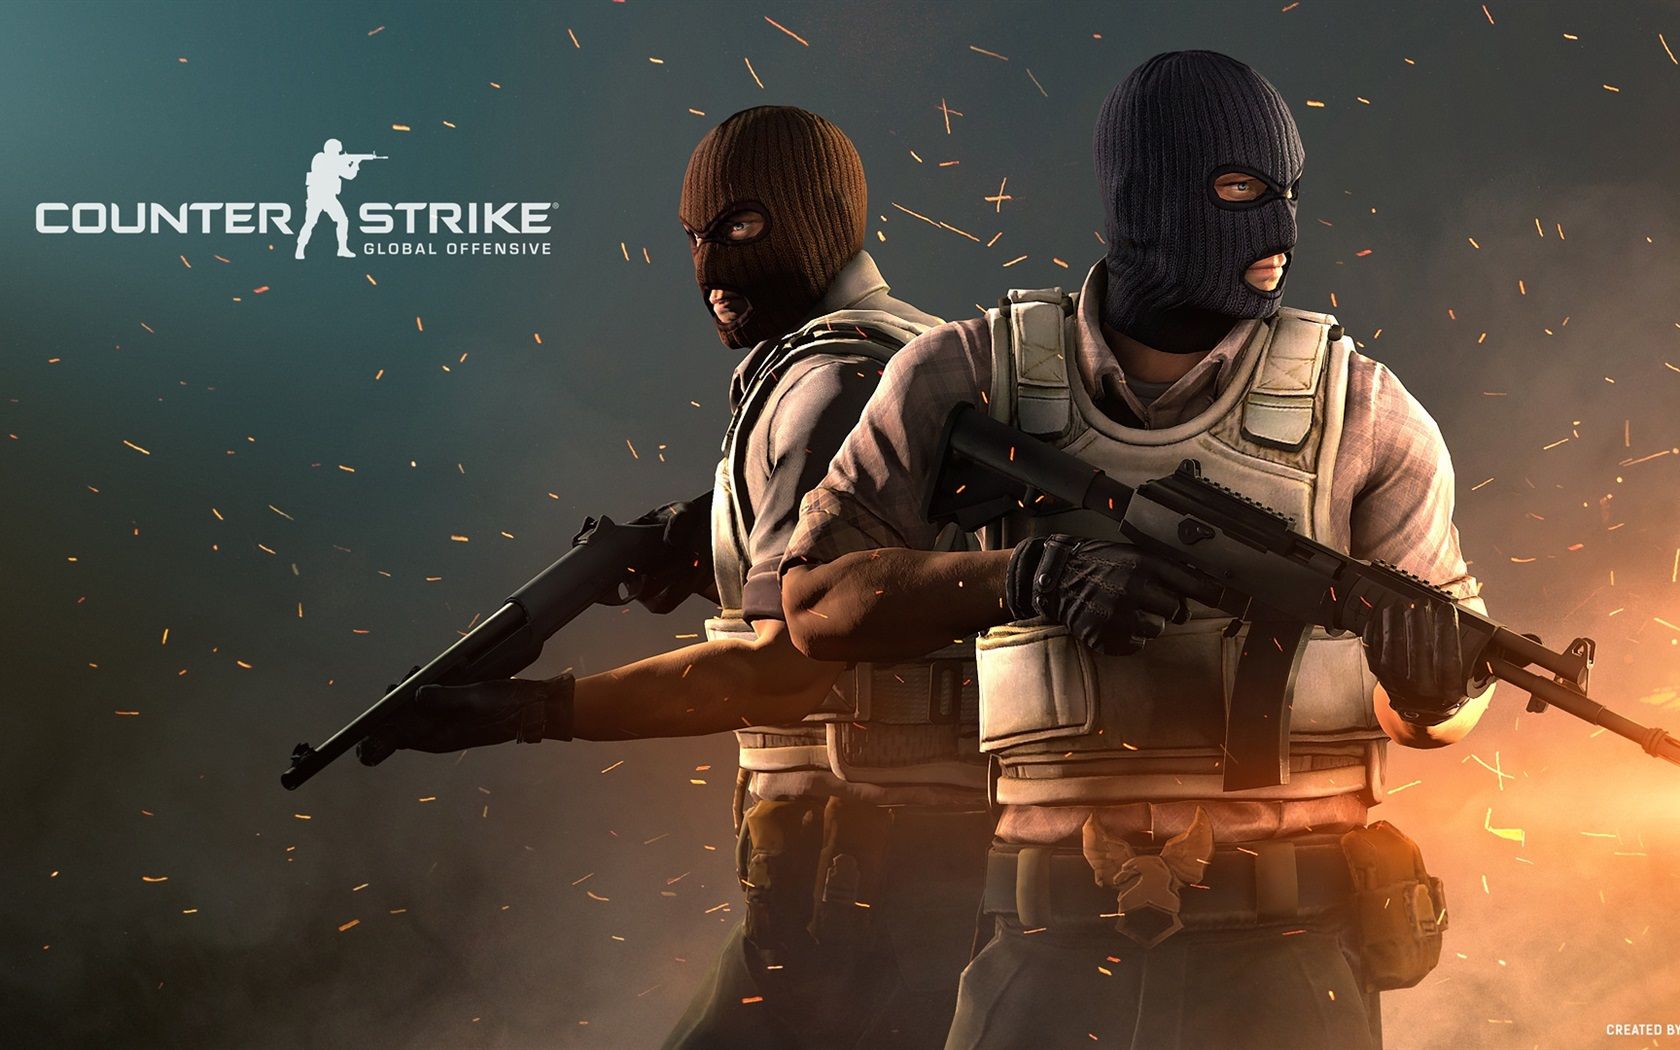 Wallpaper Counter Strike: Global Offensive, CS game 1920x1080 Full HD 2K Picture, Image